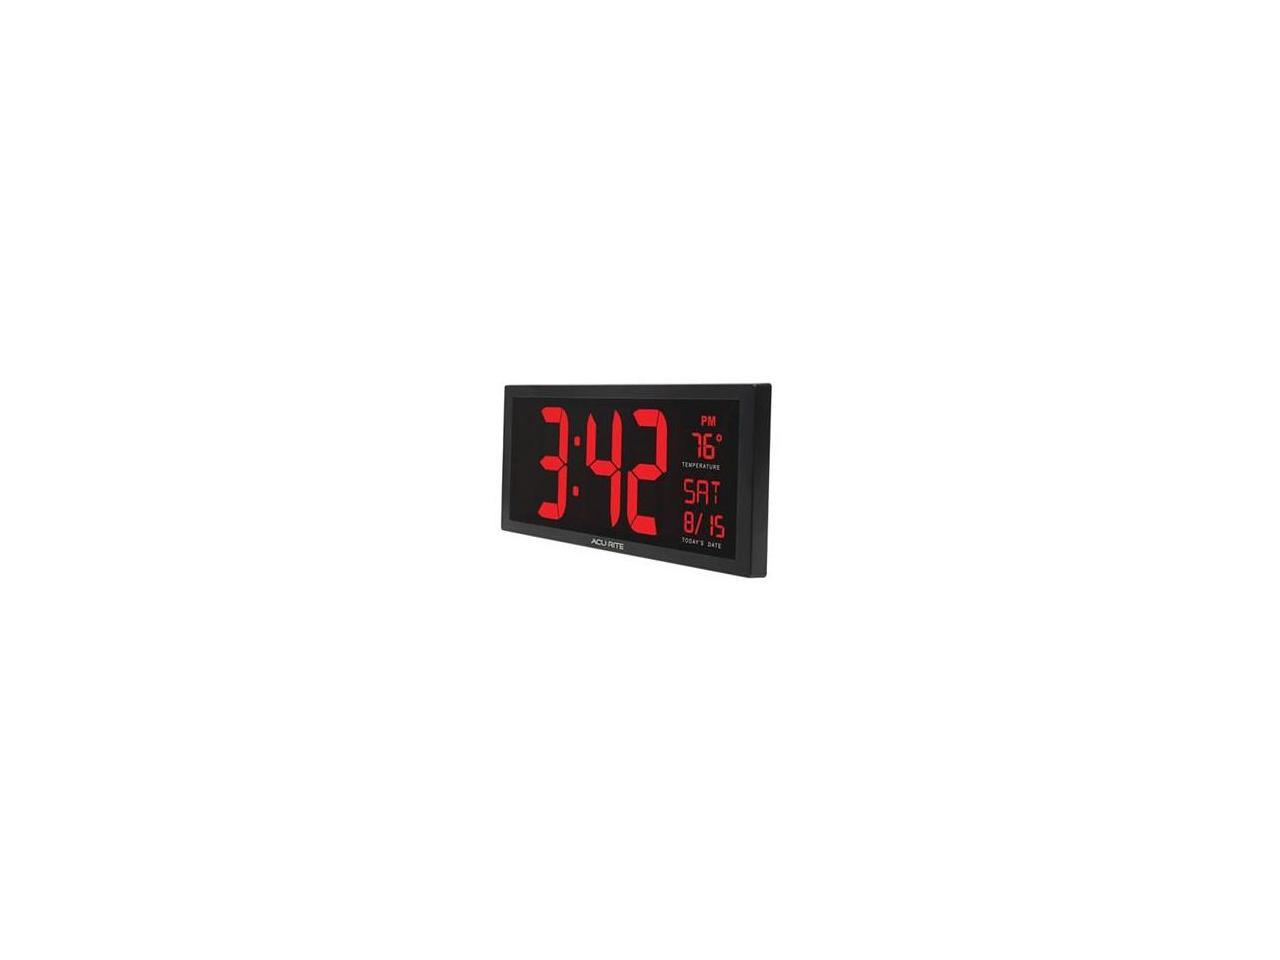 Chaney Instruments 75127A1 AcuRite Digital Wall Clock 14.5 in. 